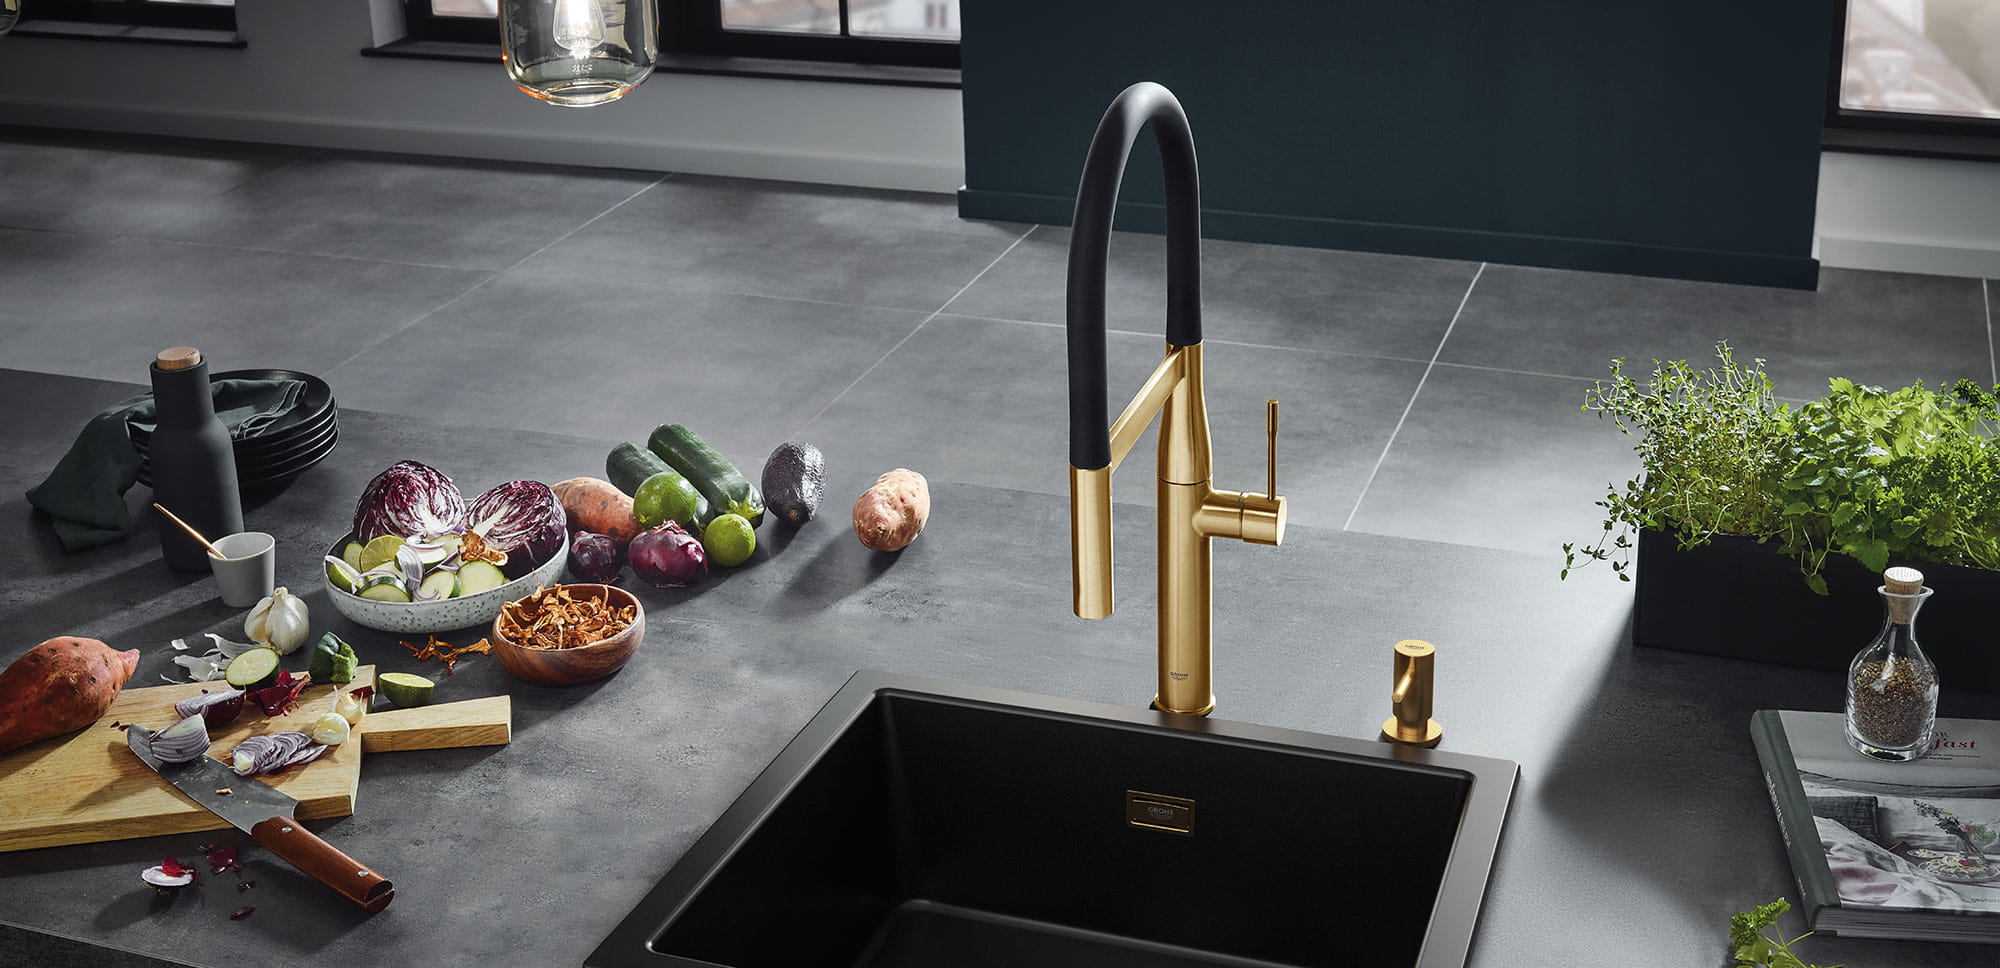 Essence Kitchen Faucet in Gold